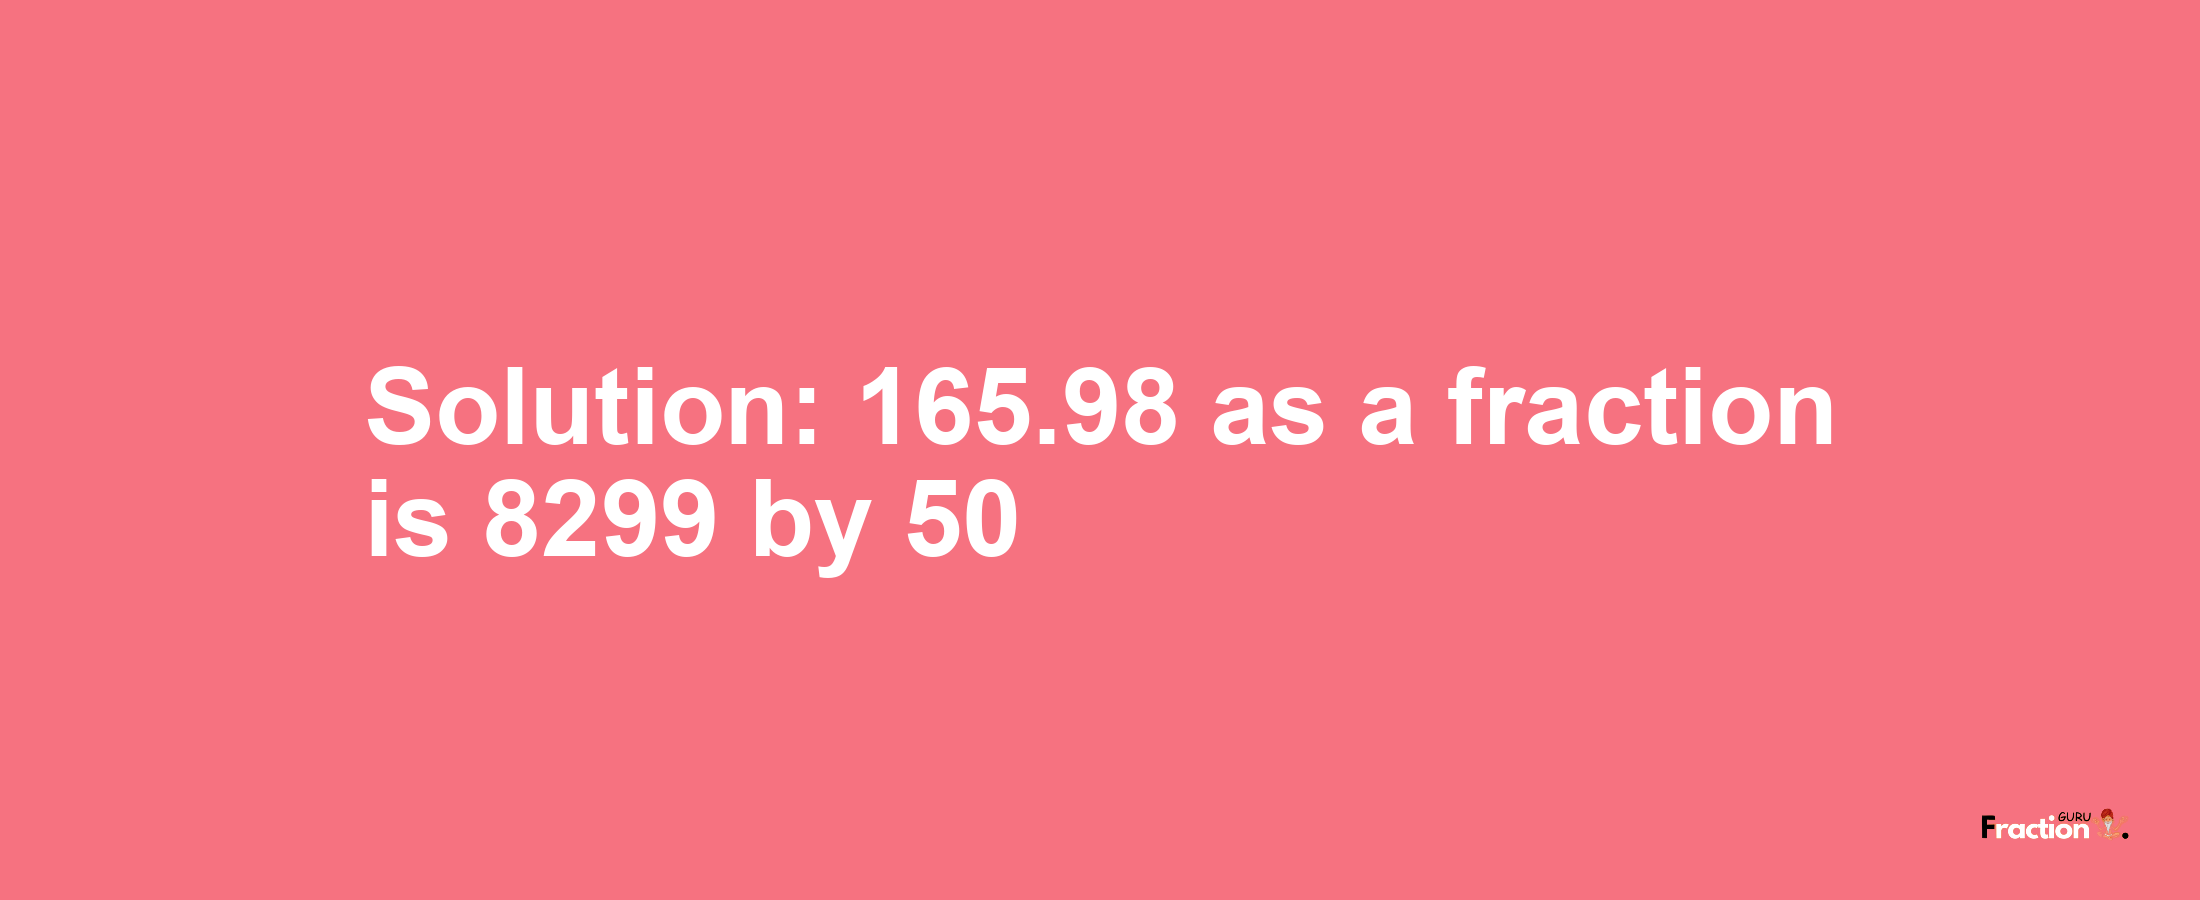 Solution:165.98 as a fraction is 8299/50